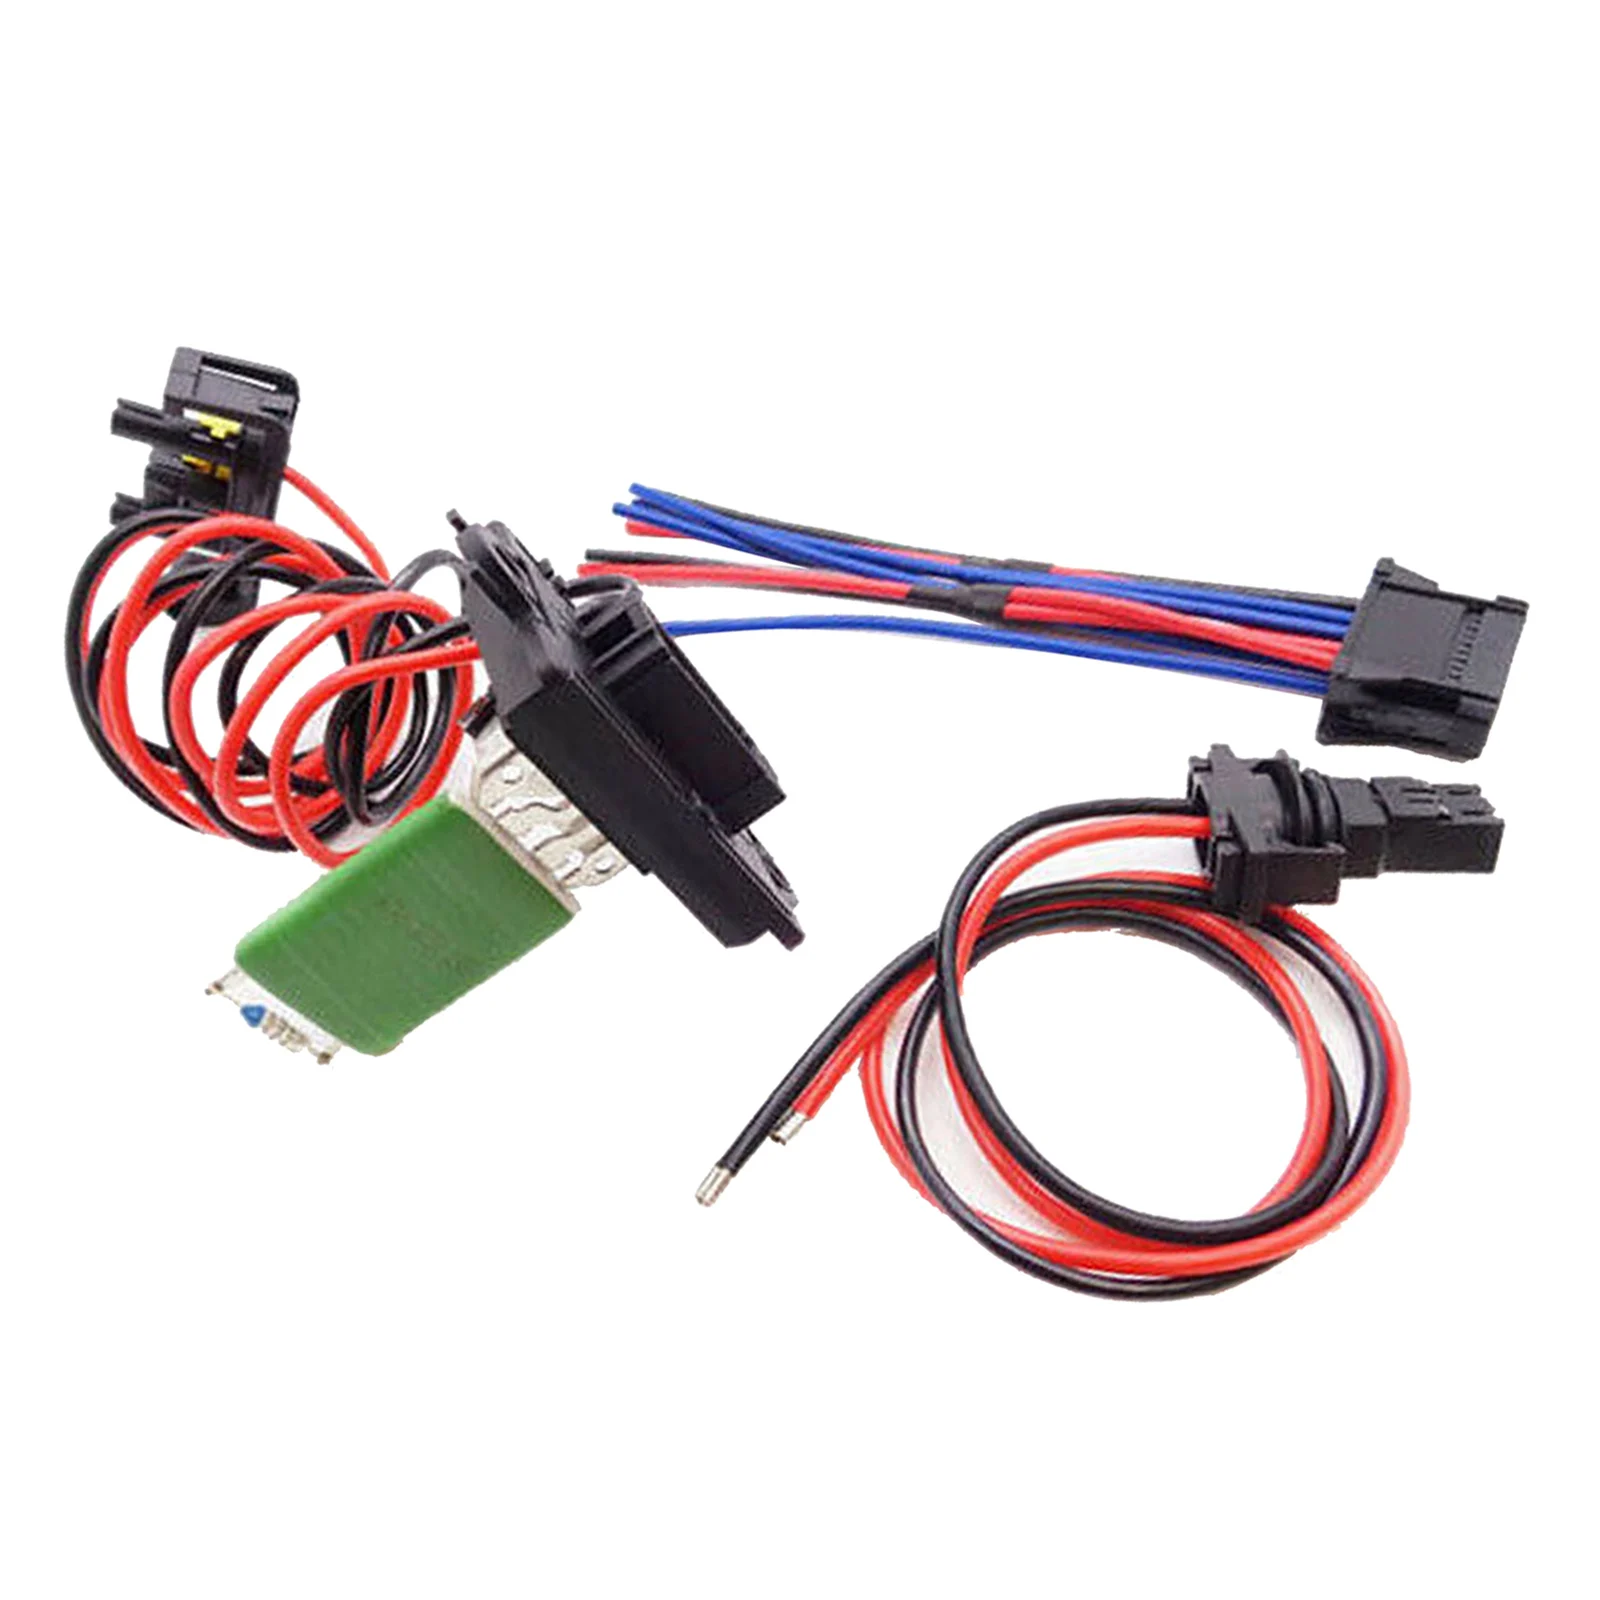 Heater Blower Resistor & Wiring Loom for Clio MK3 7701209803, Professional Accessories